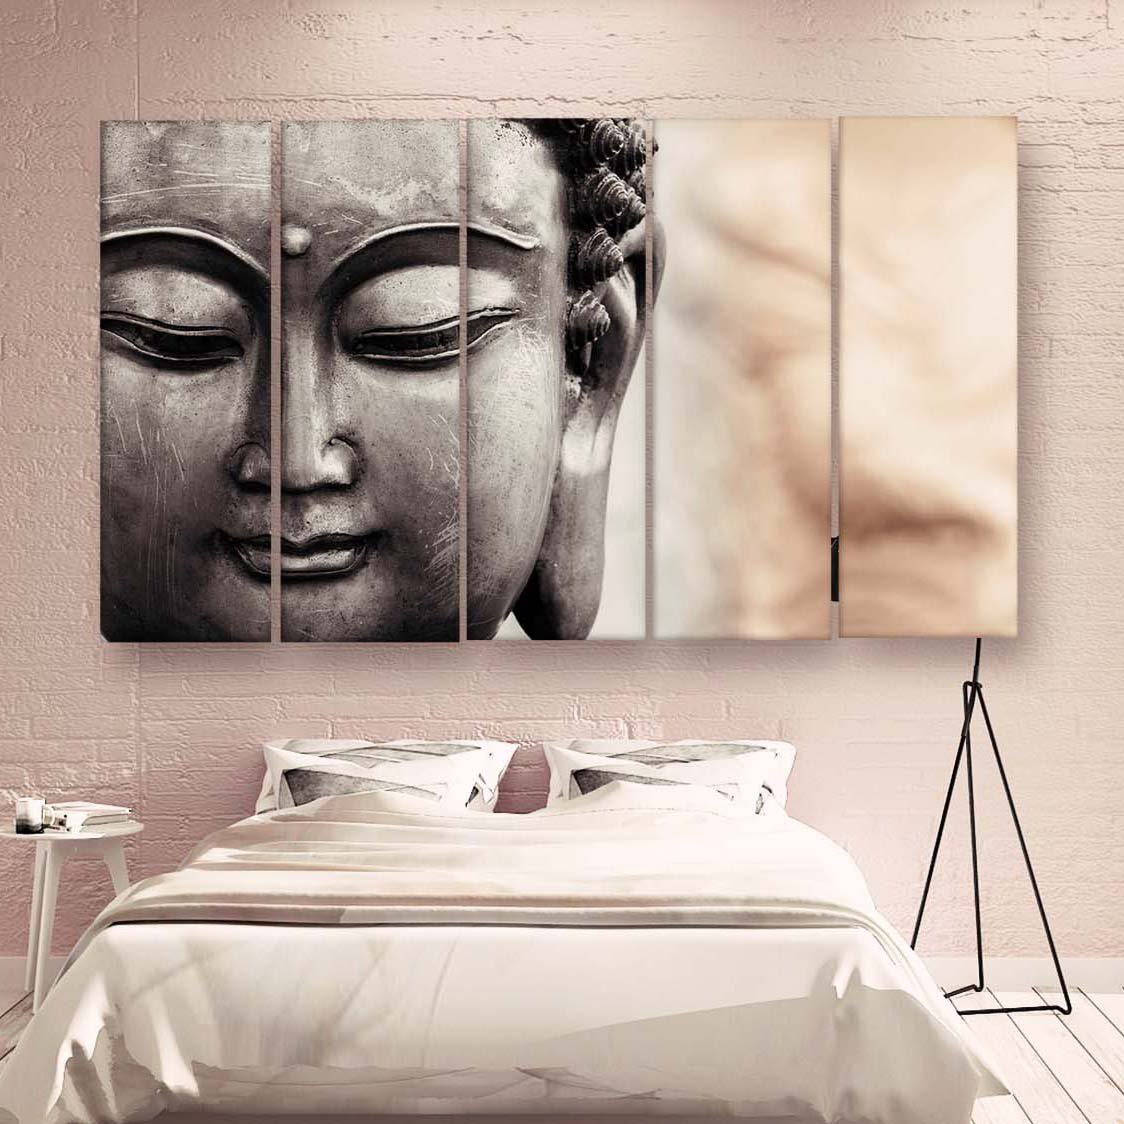 Casperme Buddha Wall Painting For Living Room for Bedroom, Hotels & Office Decoration (48×30 inhes)